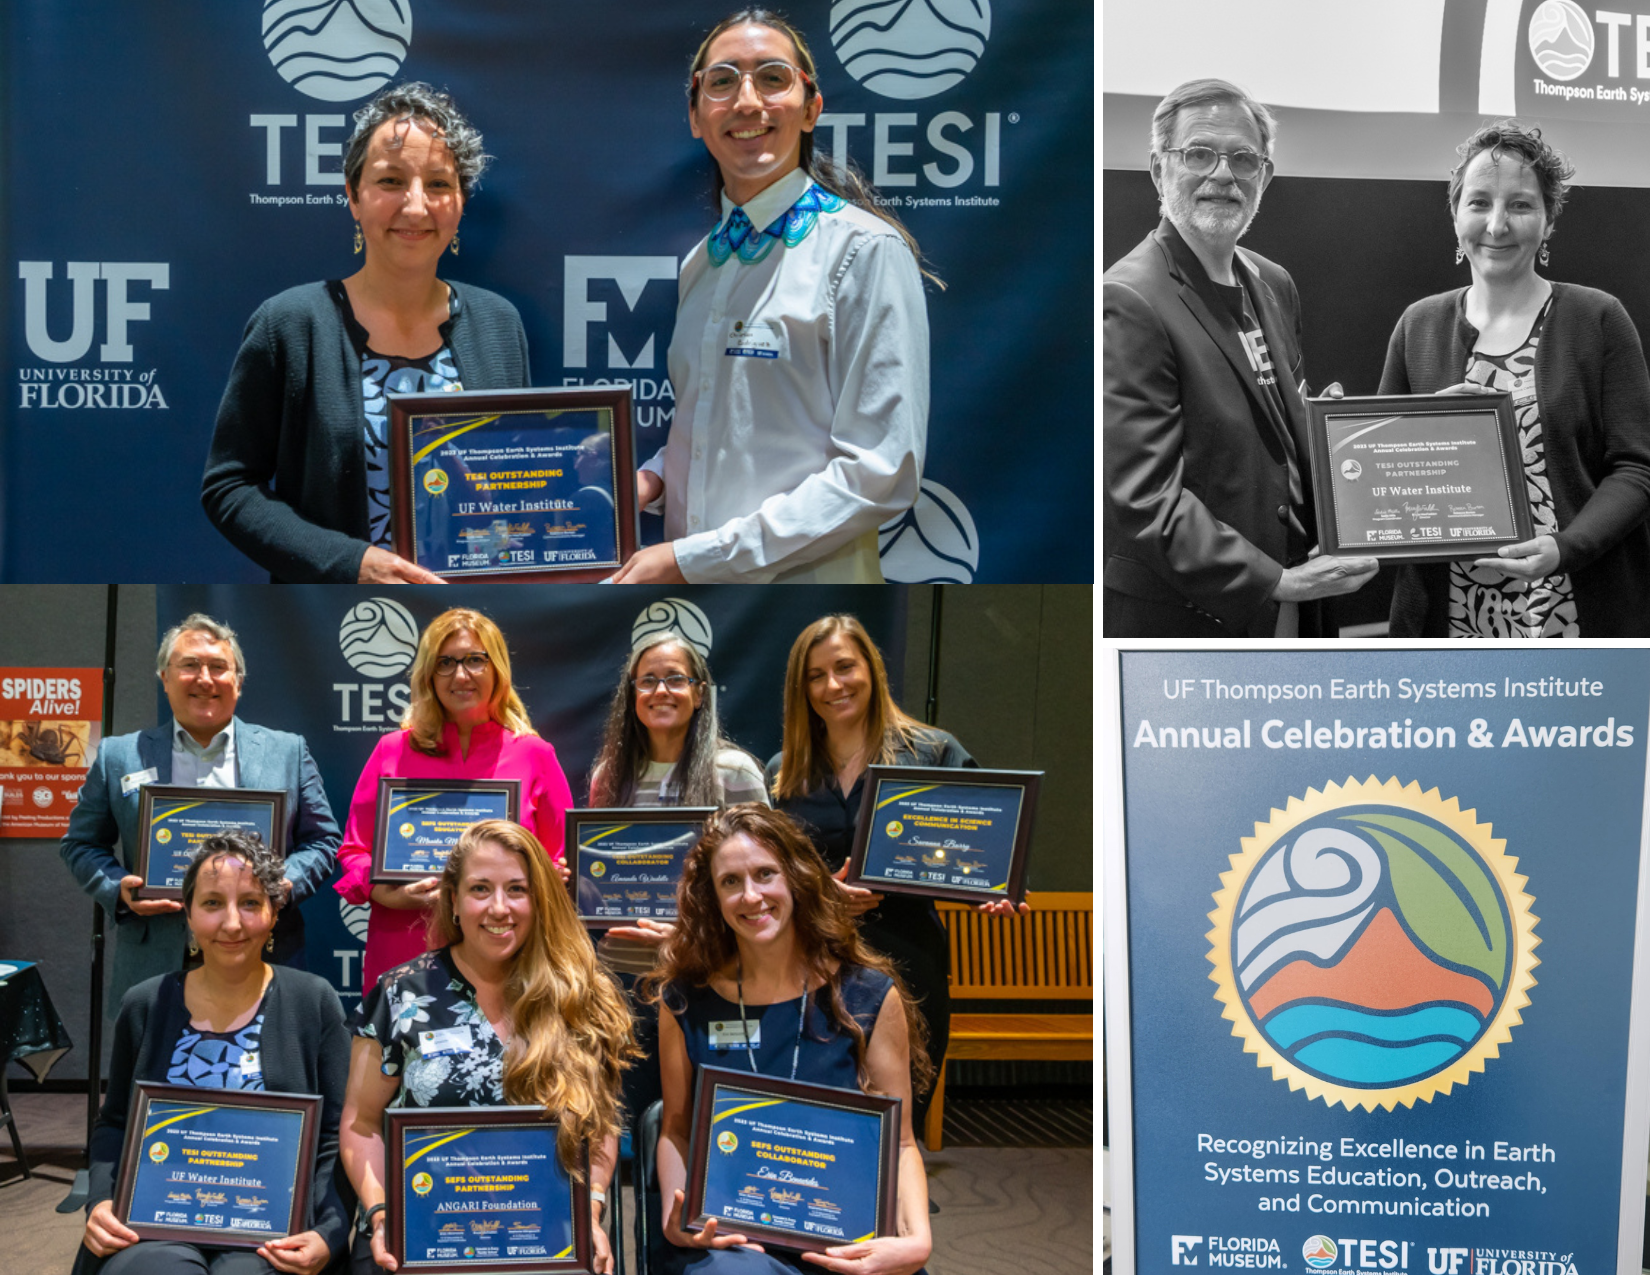 Collage of picture featuring other award winners, Water Institute staff with award, and event poster